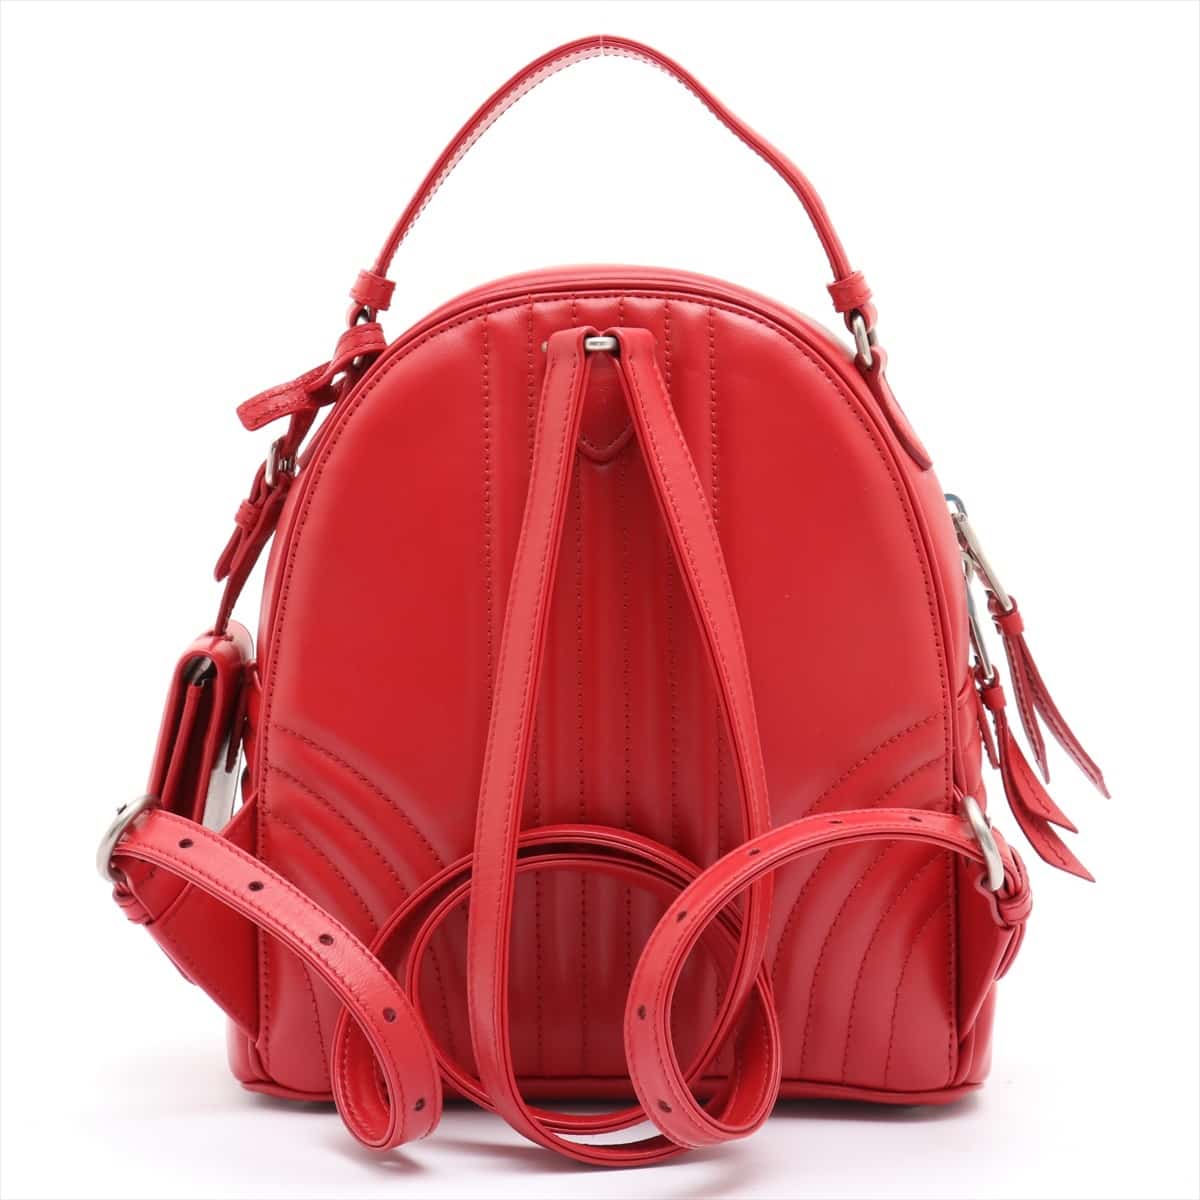 Prada Diagram Leather Backpack Red 1BZ030 open papers